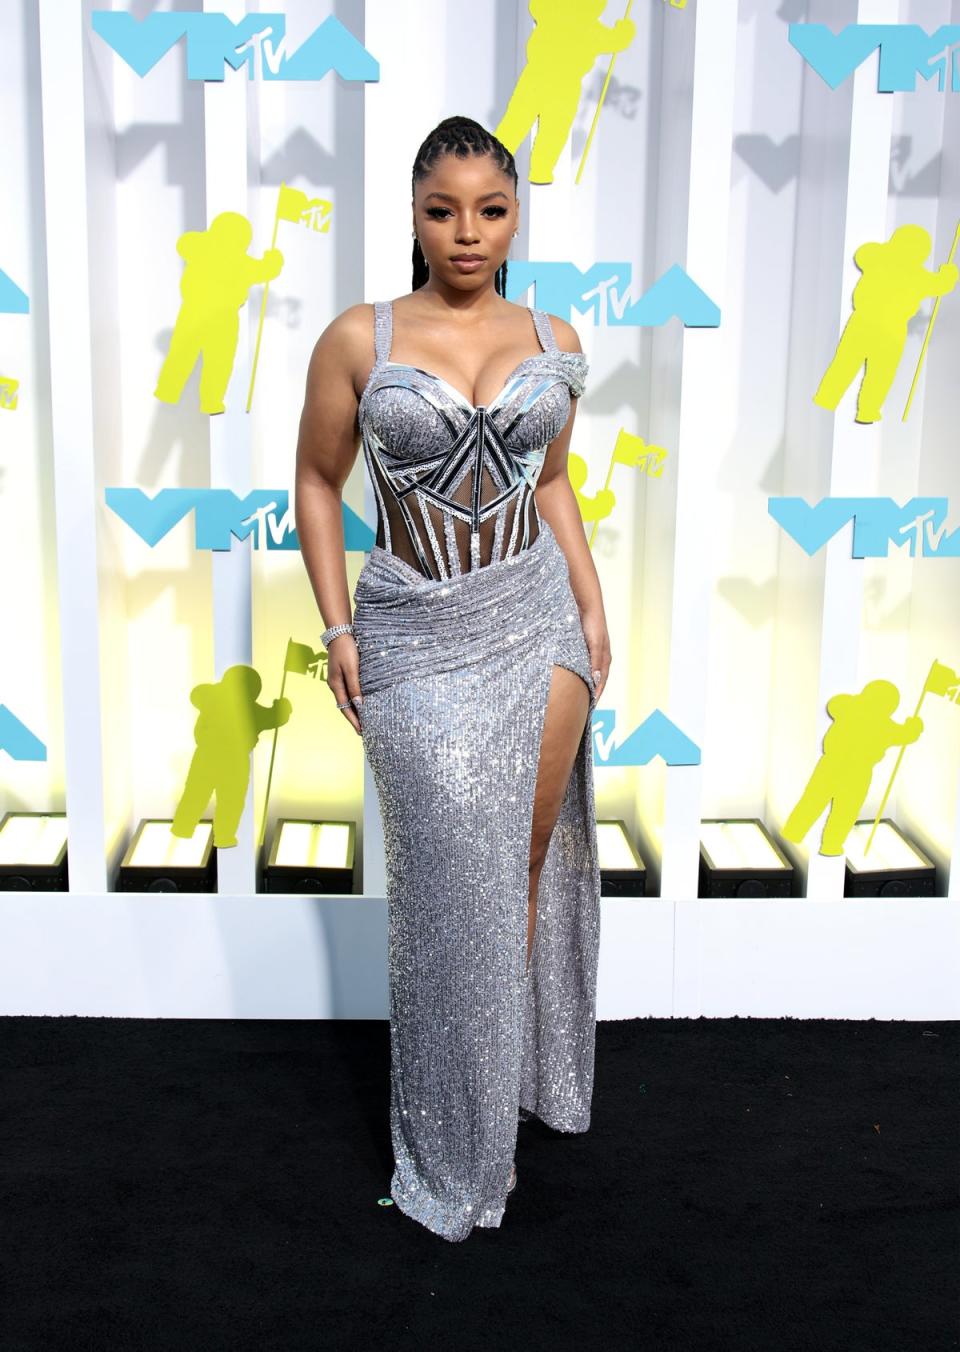  (Getty Images for MTV/Paramount G)